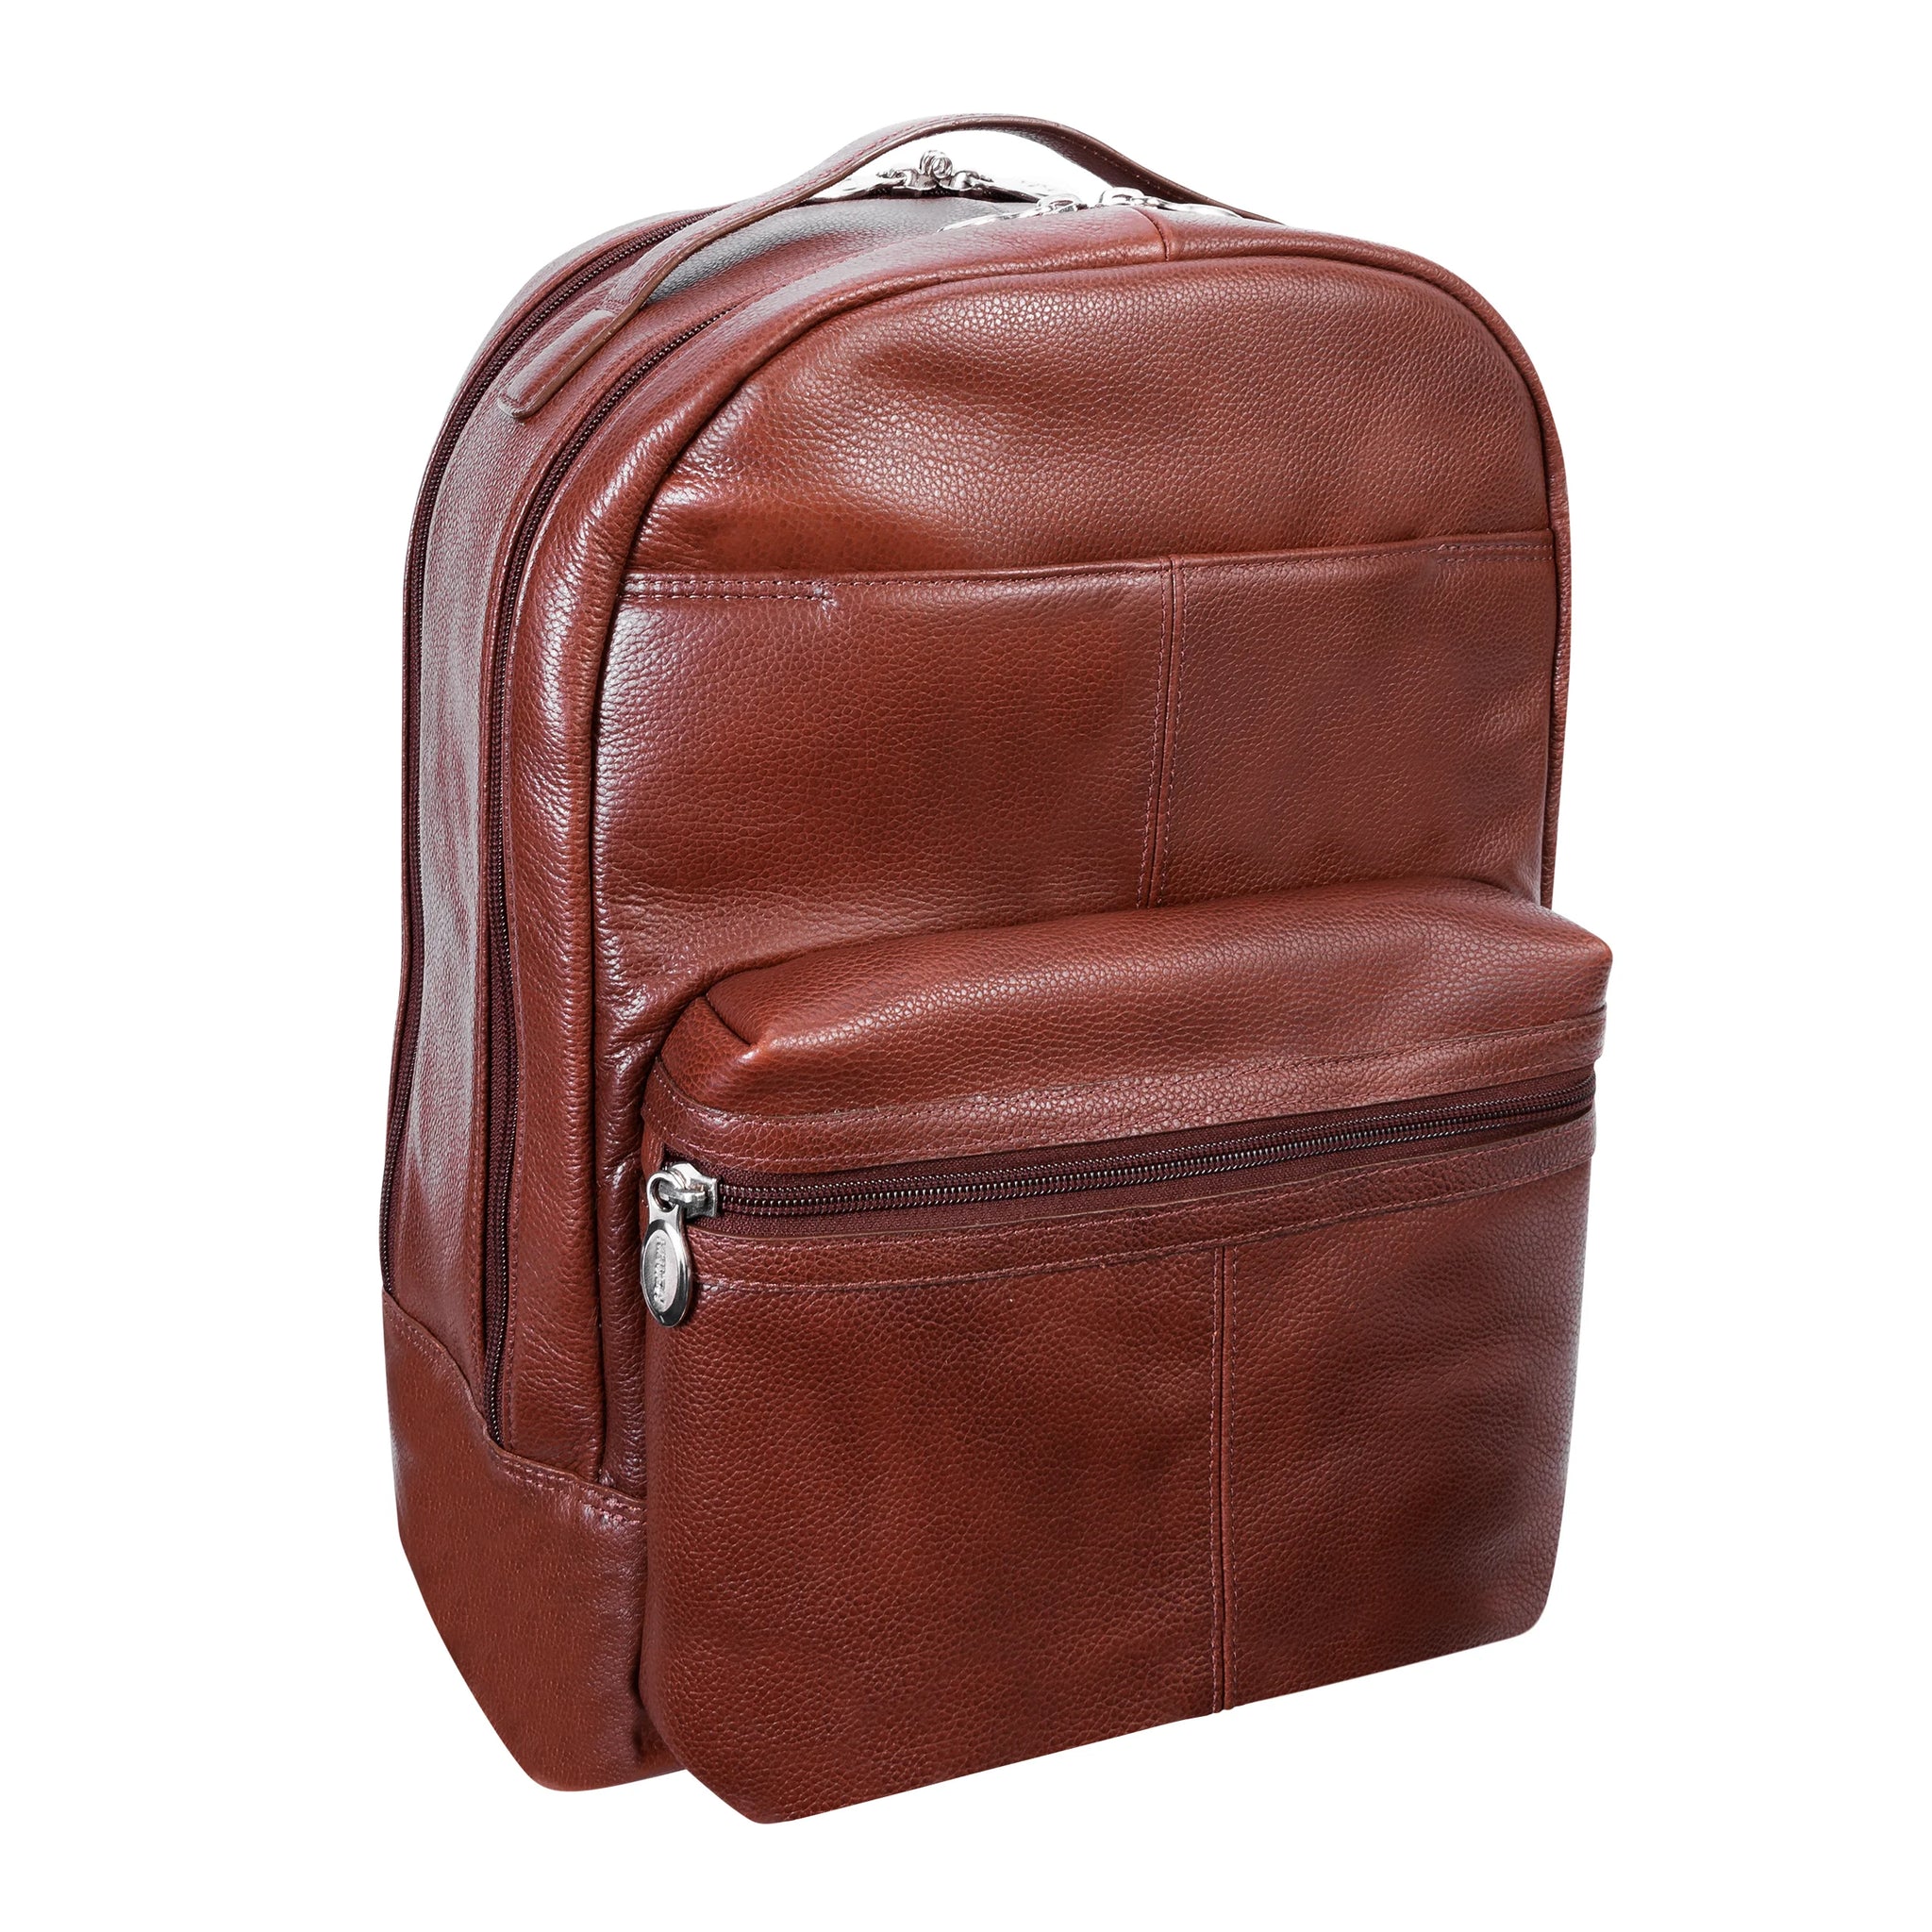 McKlein PARKER 15" Leather Dual Compartment Laptop Backpack